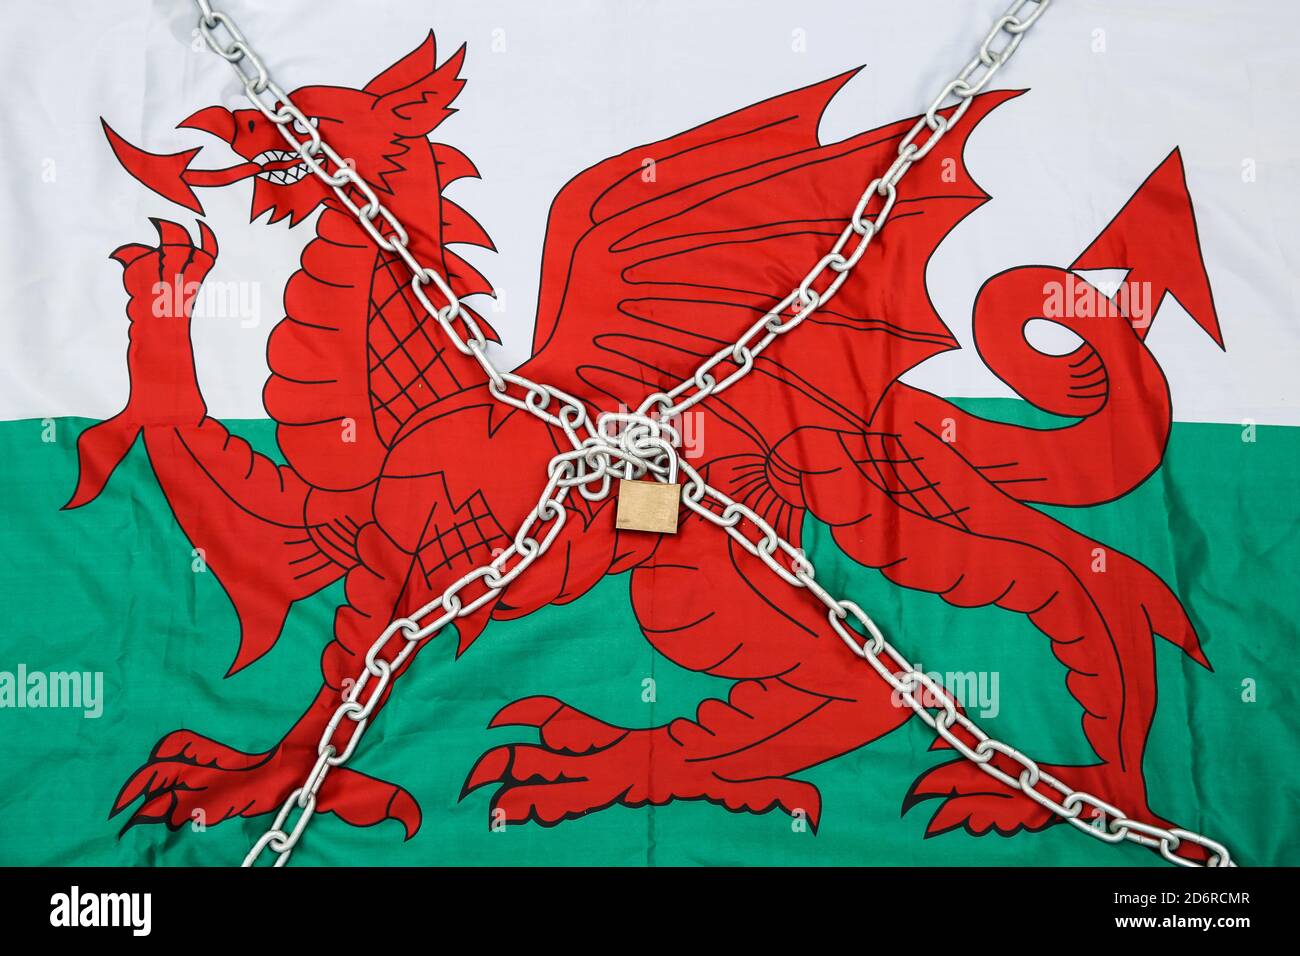 19th October 2020. A Welsh flag in chains. The Welsh Government are discussing the possibility of imposing a second National lockdown on Wales with an announcement due today. ®Jon Freeman/Alamy Live News Stock Photo